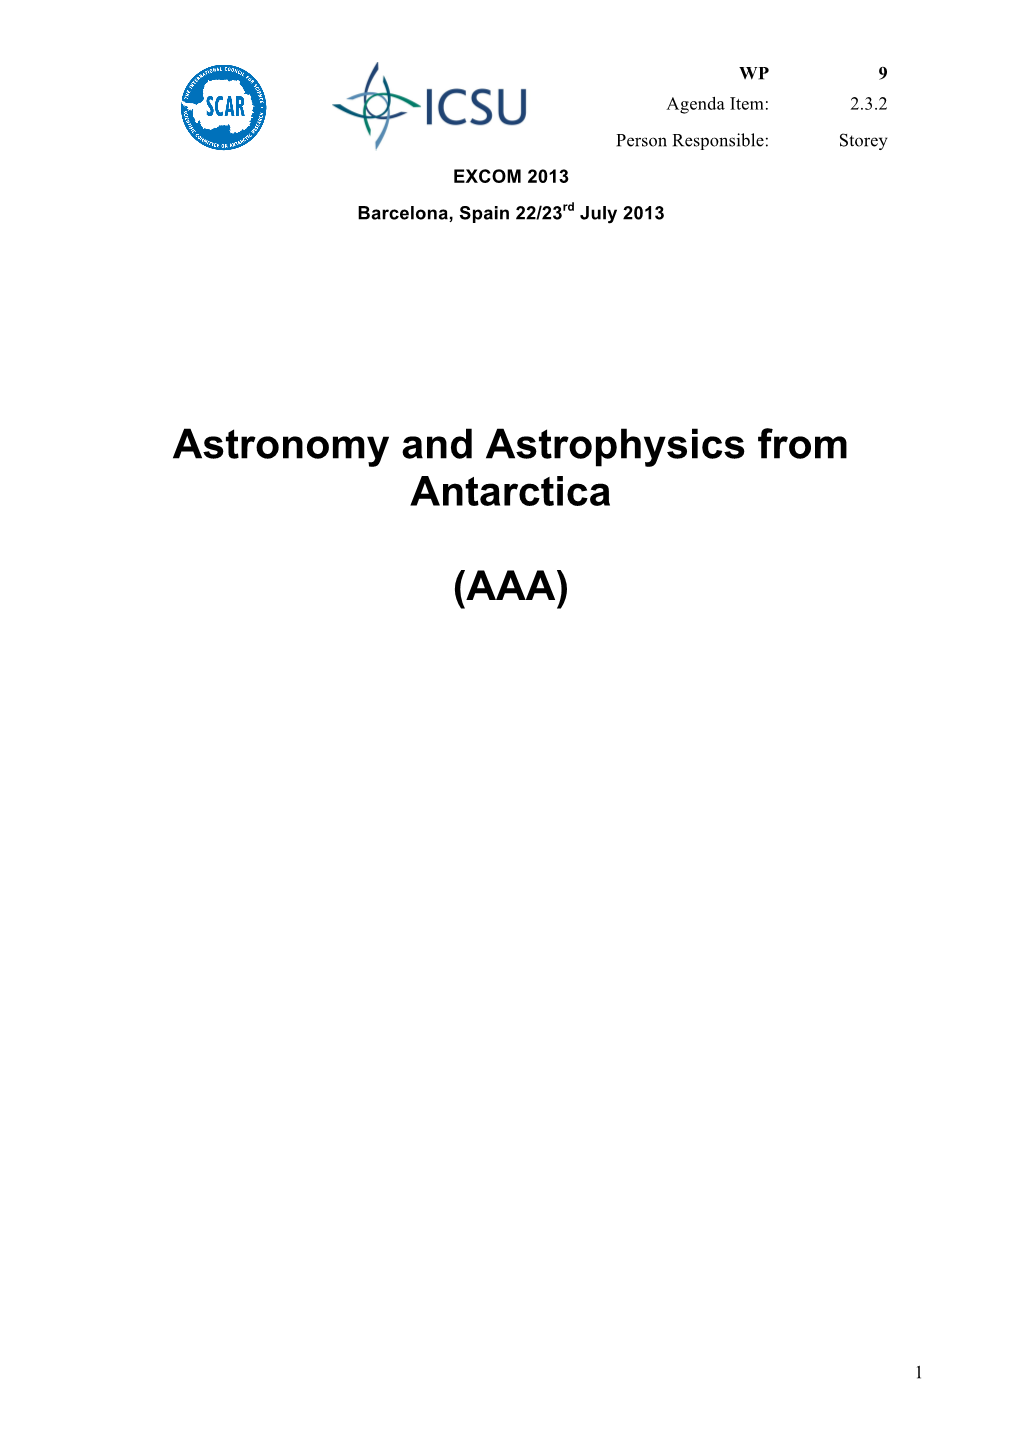 Astronomy and Astrophysics from Antarctica (AAA)